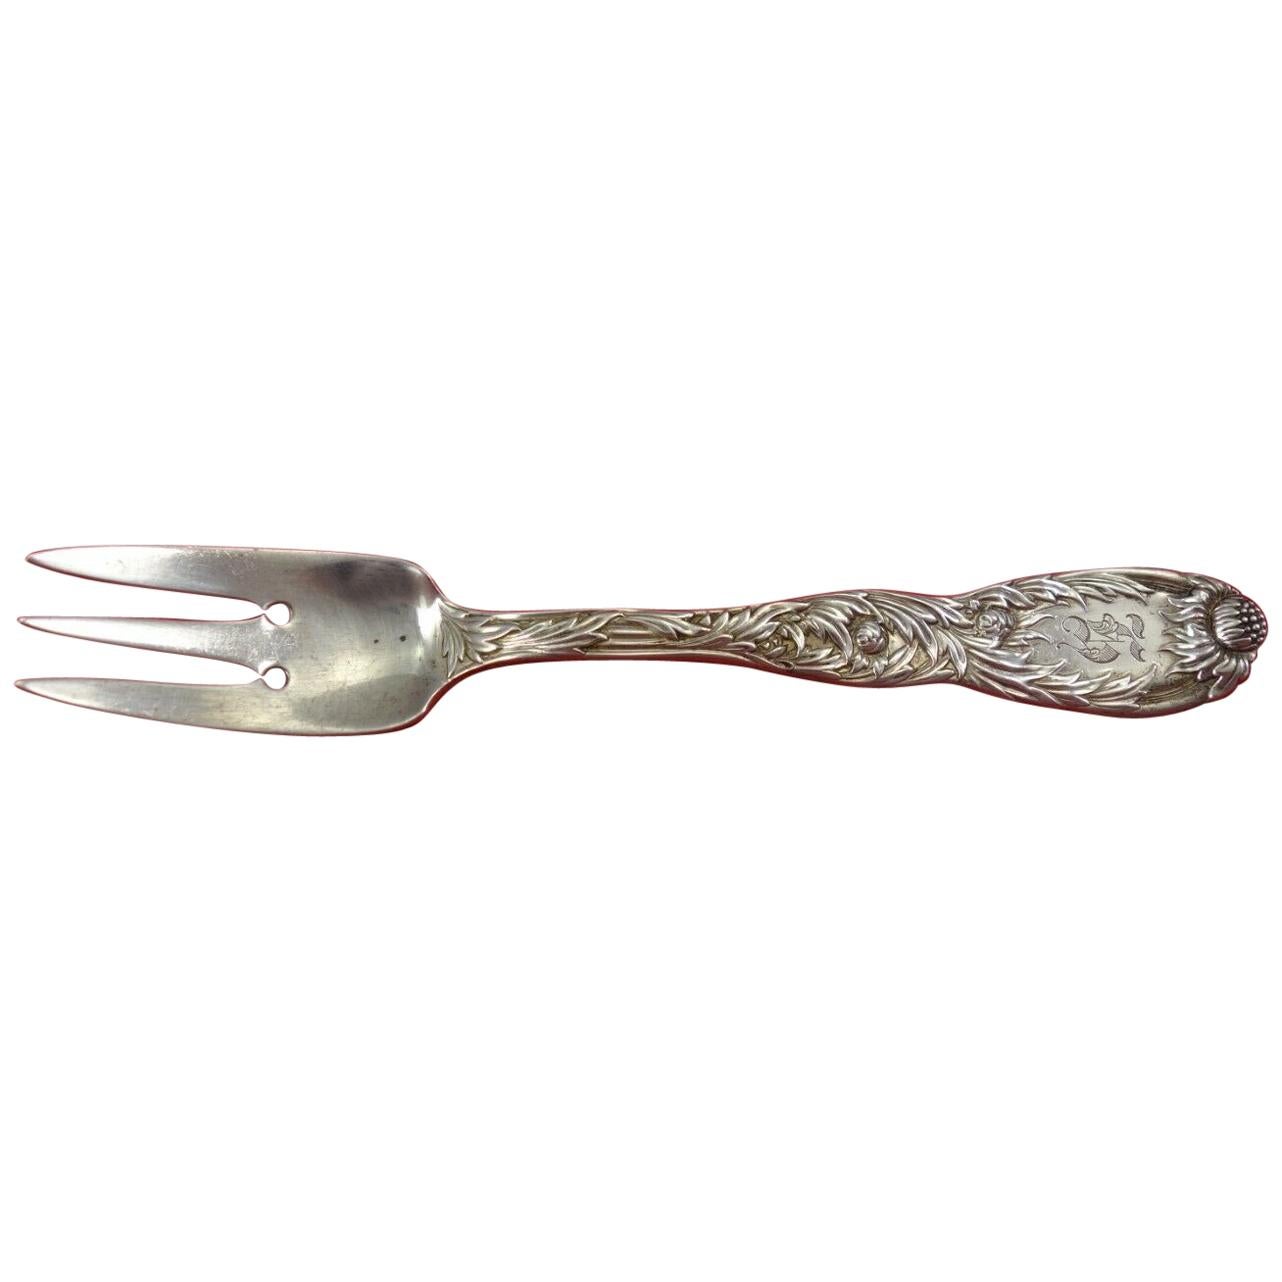 Chrysanthemum by Tiffany and Co. Sterling Silver Salad Fork 3-tine 2-hole 6 3/4"